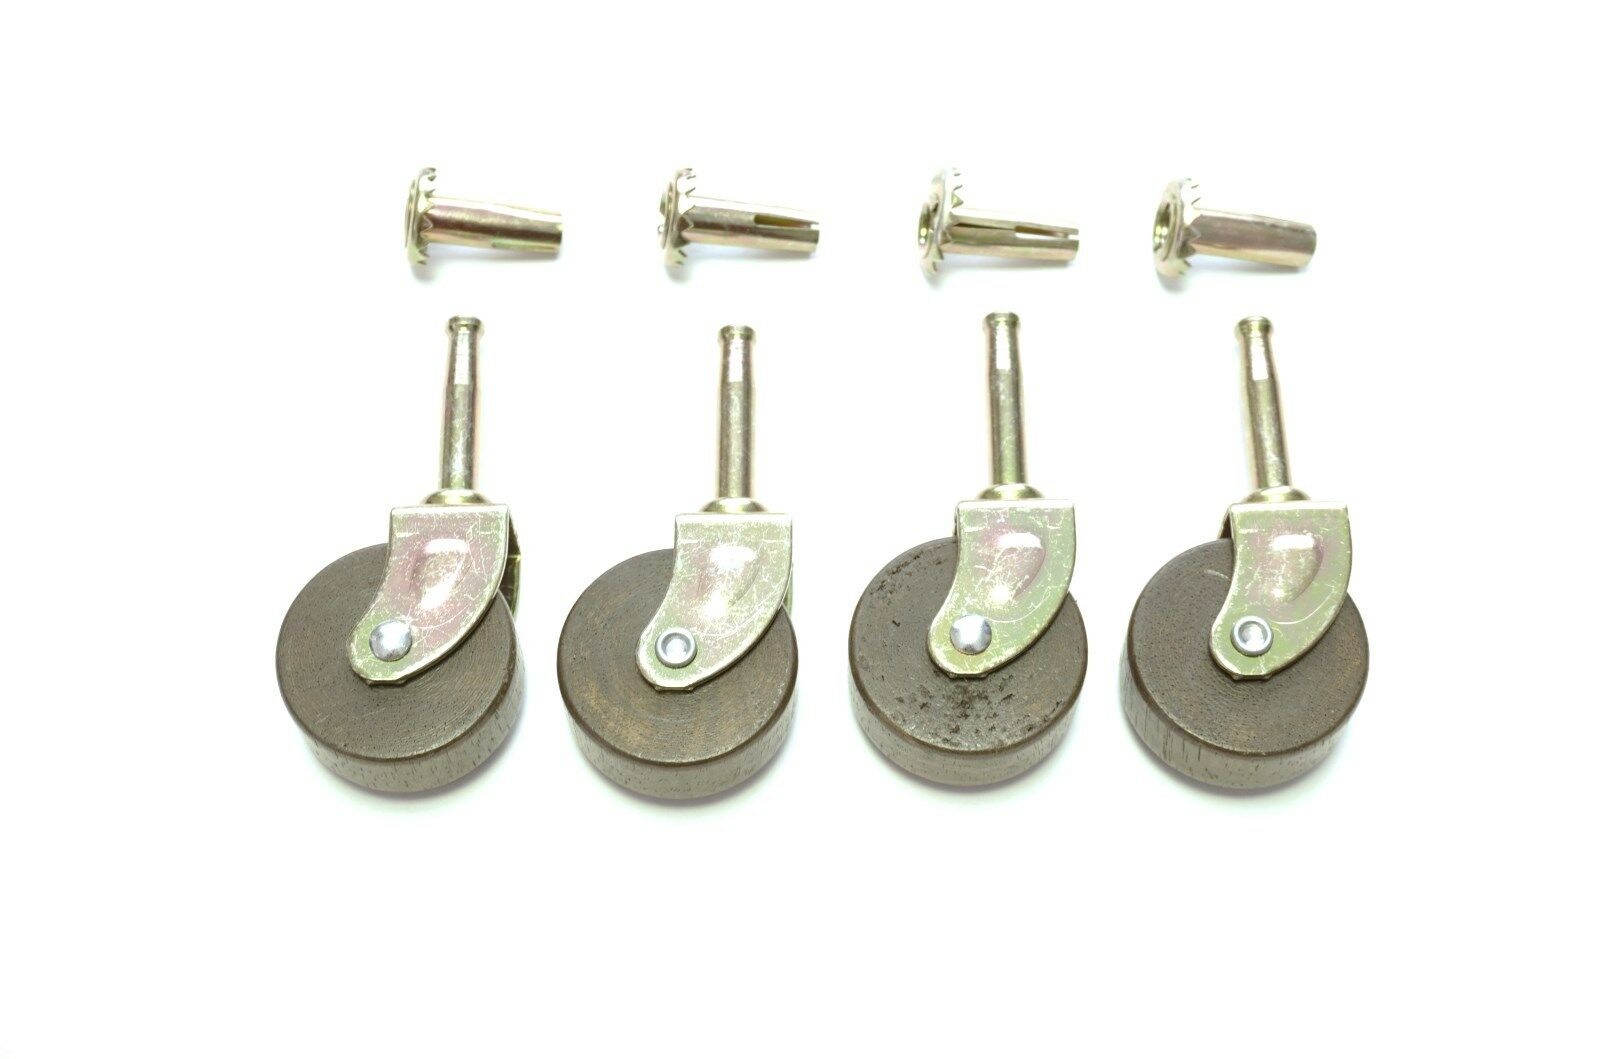 4 Furniture Casters Wood Furniture Casters Grip Neck Caster 1-5/8” Antique Style